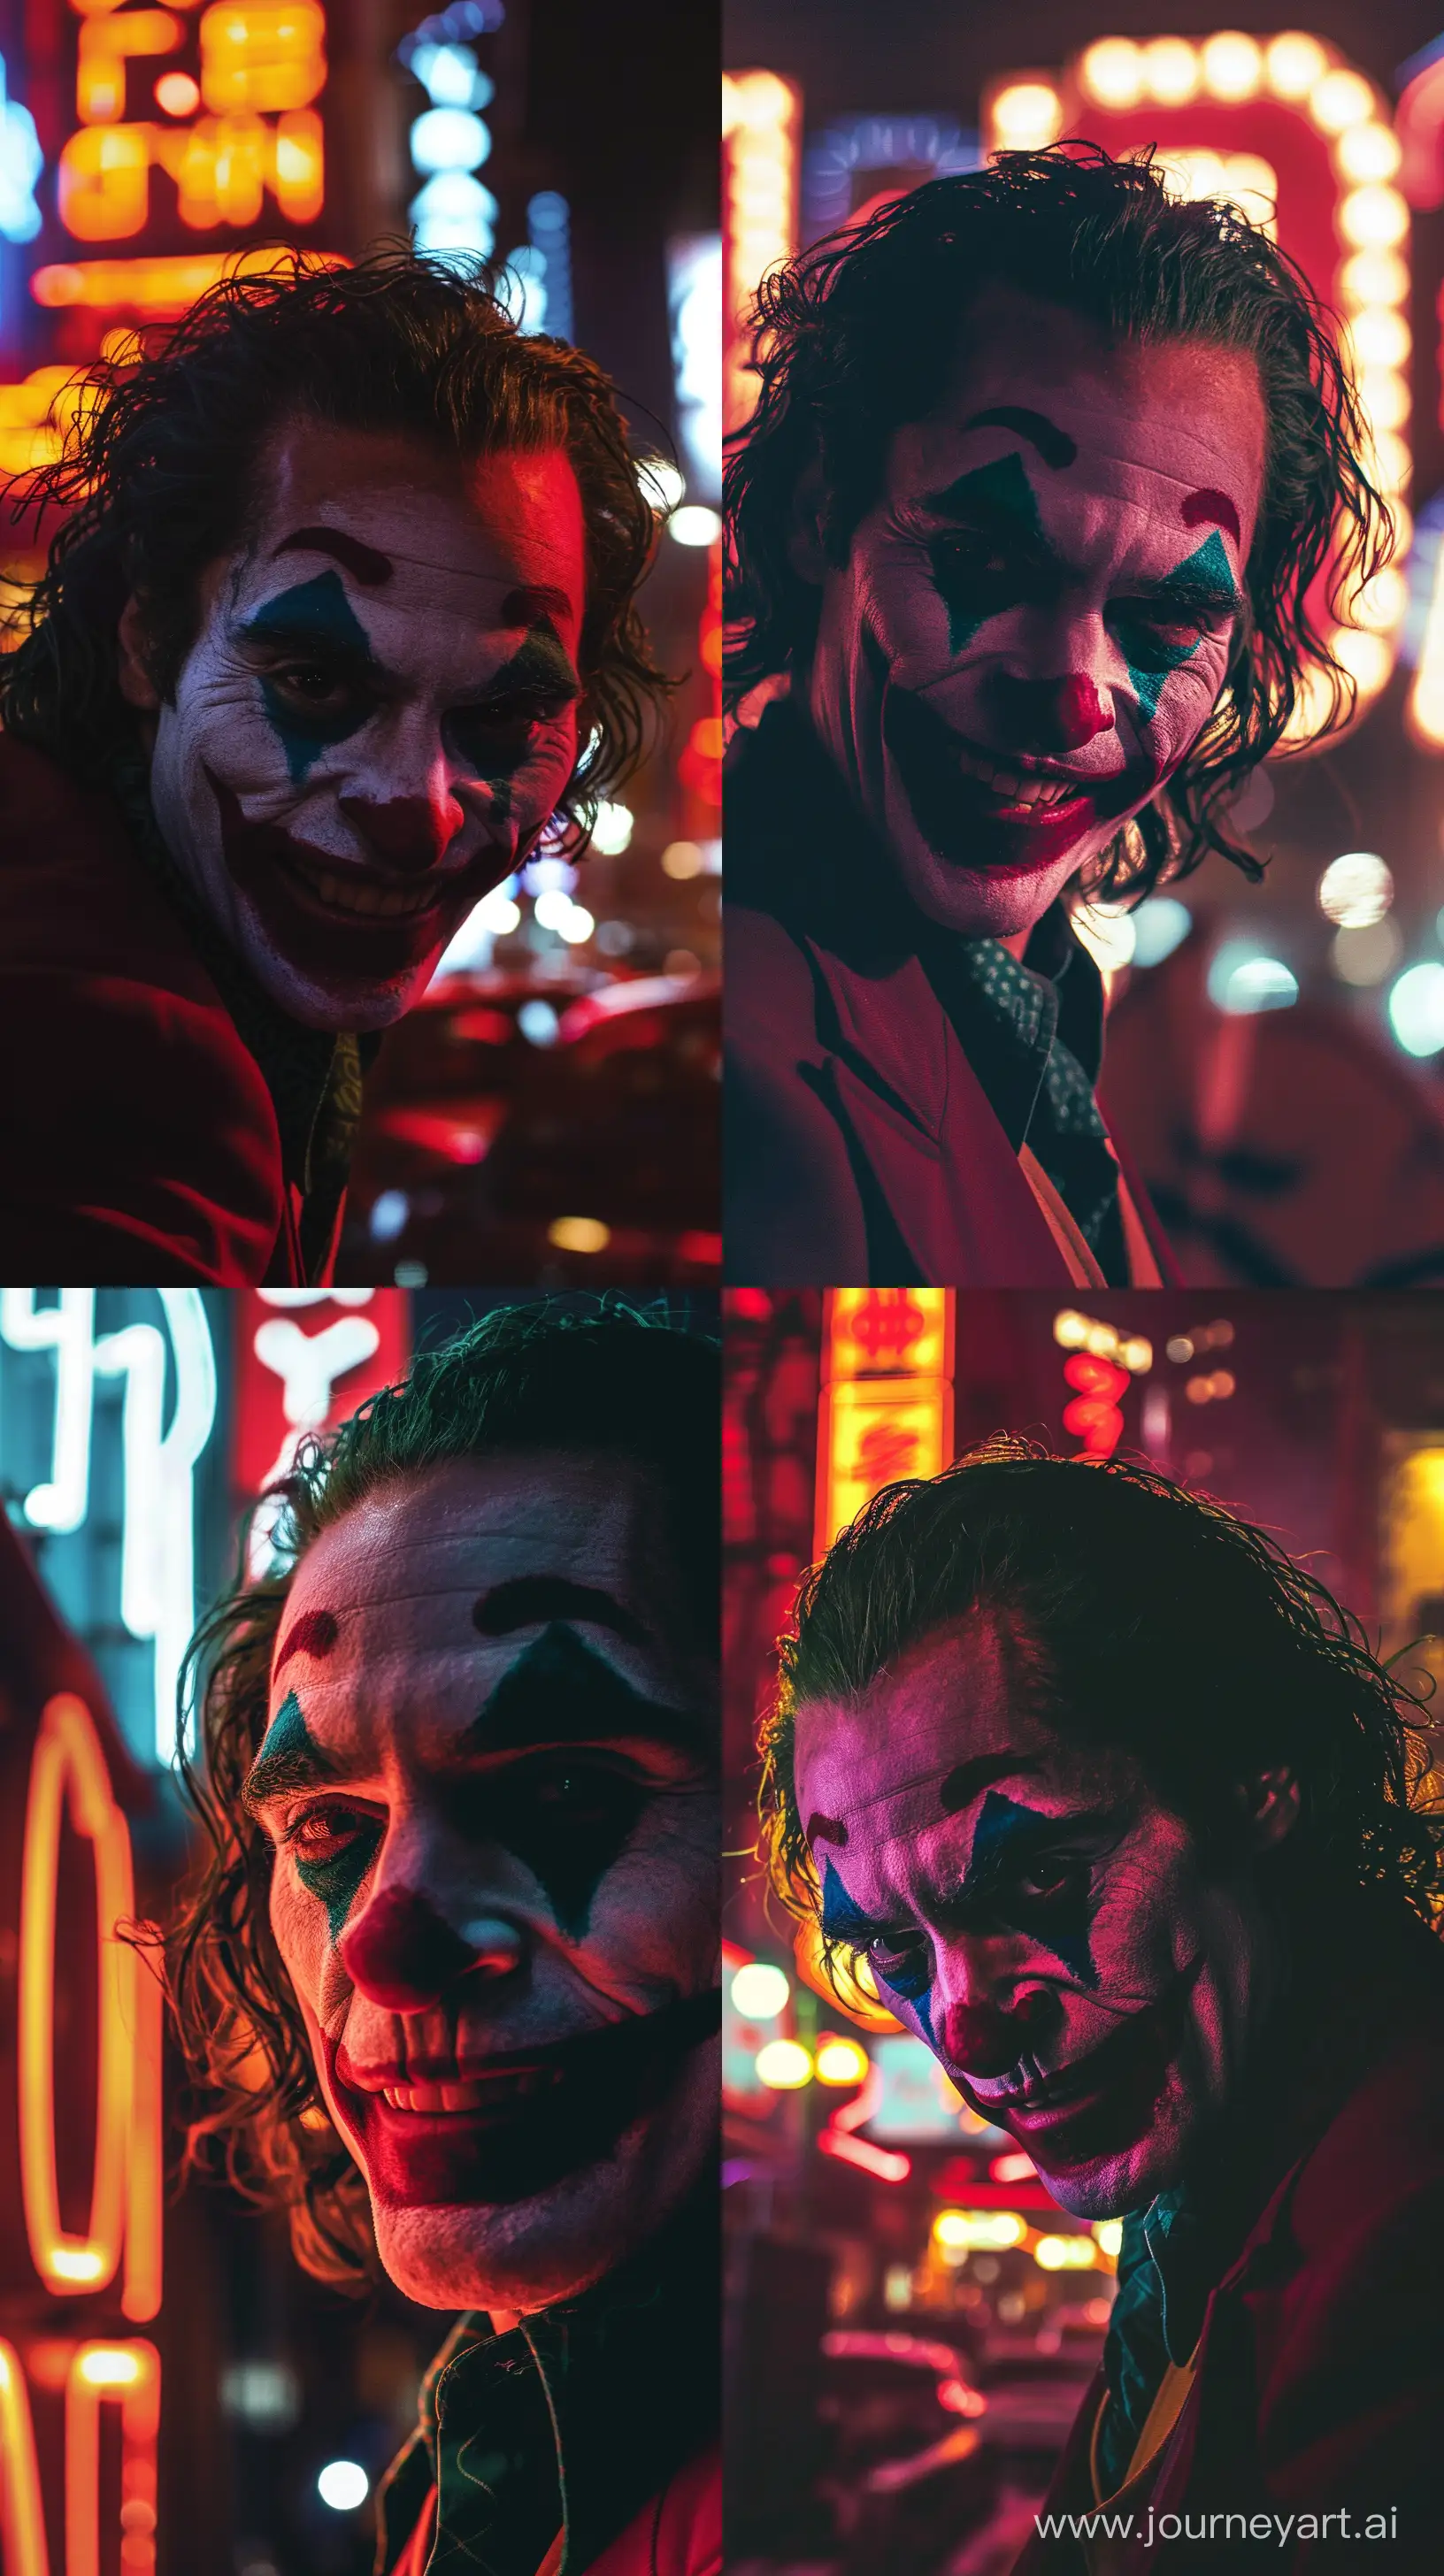 In Gotham City, Heath Ledger's Joker appears in an extreme close-up shot, his face twisted into a maniacal grin, illuminated by the flickering lights of the city's neon signs. The shadows accentuate the contours of his iconic makeup, emphasizing his chaotic nature. Shot with a cinematic red cinema digital camera, capturing every detail of Ledger's portrayal, with intense contrast and vibrant colors. --ar 9:16 --style raw --v 6